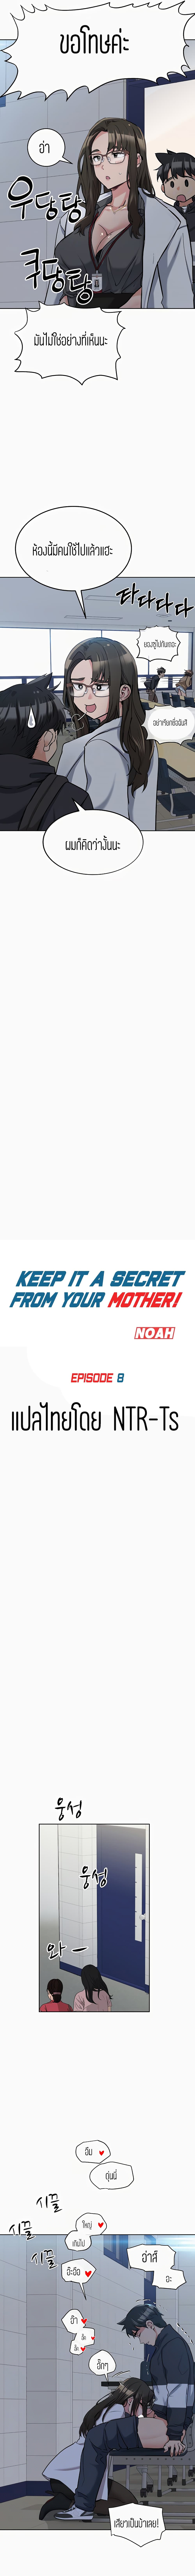 Keep it A Secret from Your Mother! 8 (3)